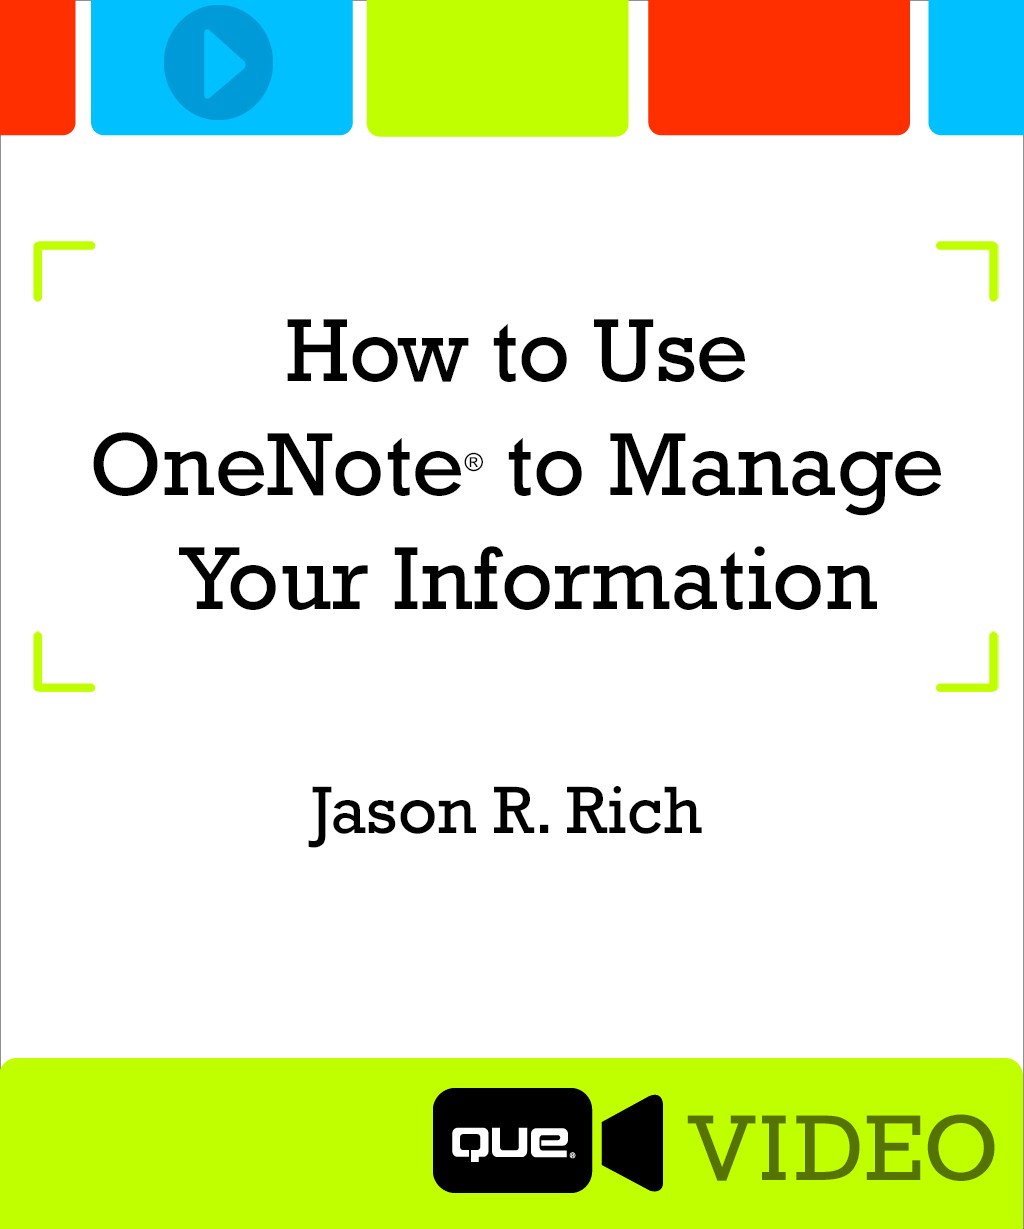 Part 6: Using OneNote in the Real World